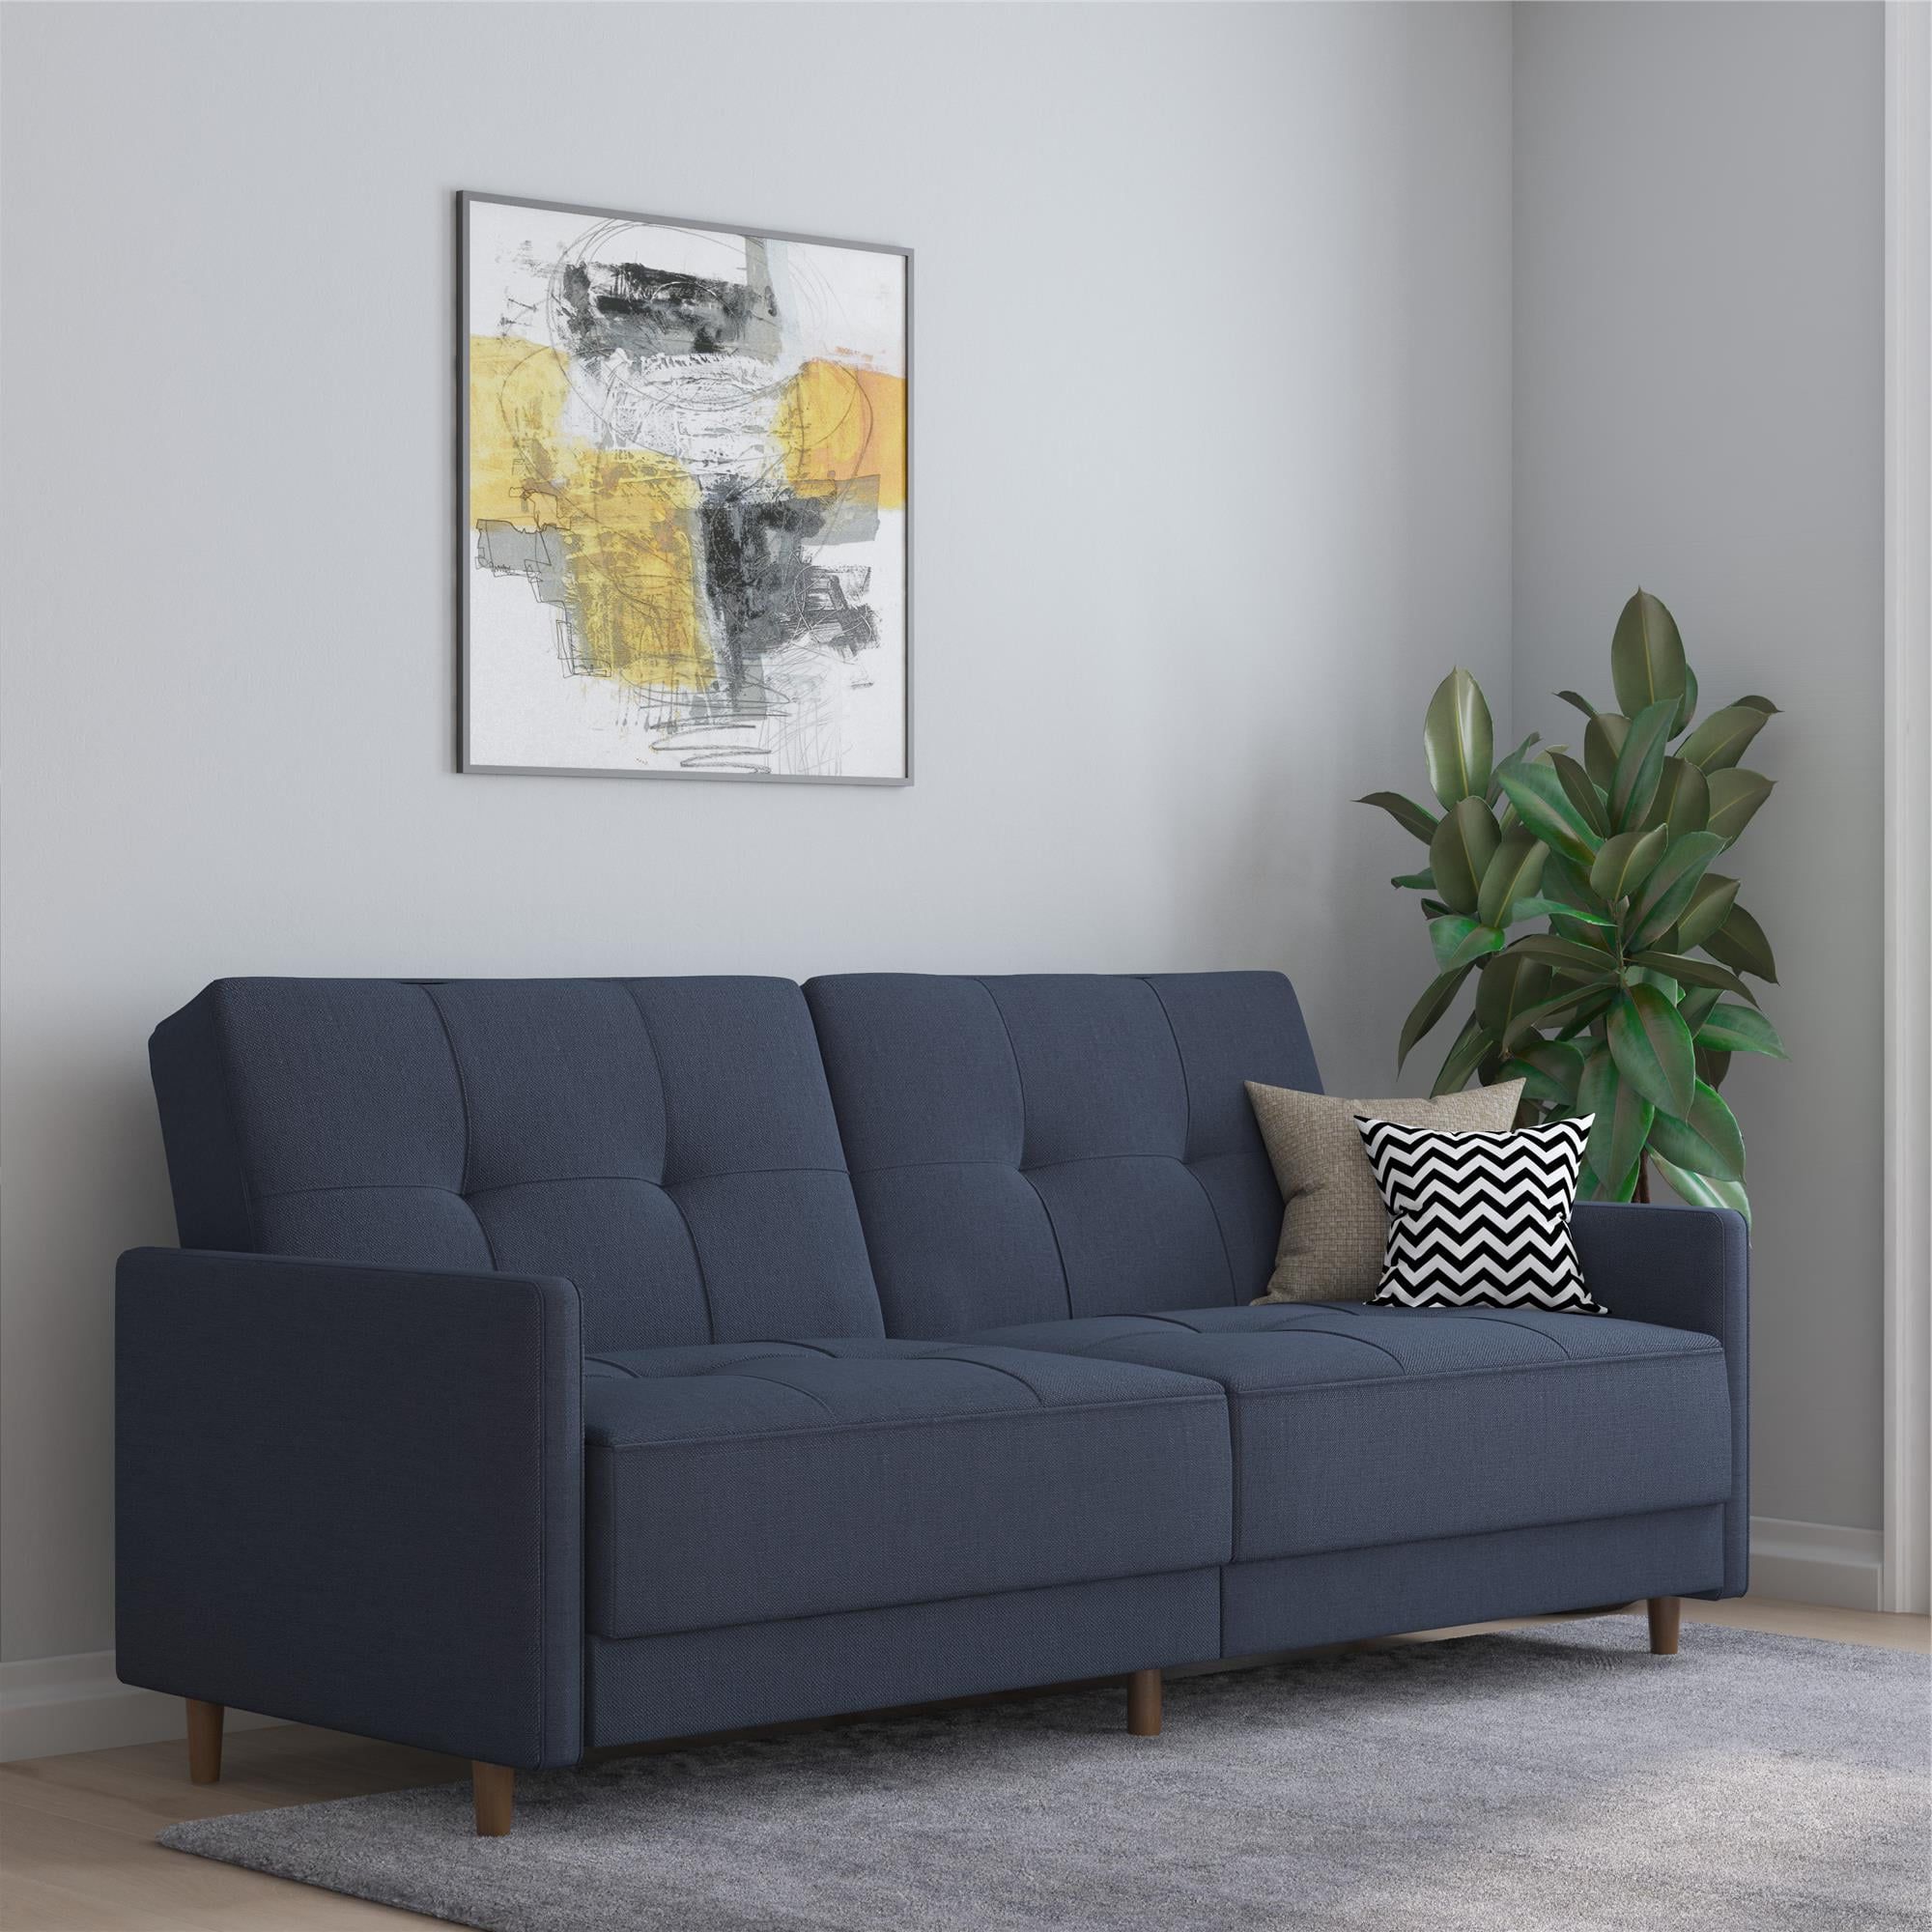 Dhp Andora Coil Futon, Navy Blue Linen – Walmart Intended For Navy Linen Coil Sofas (View 2 of 20)